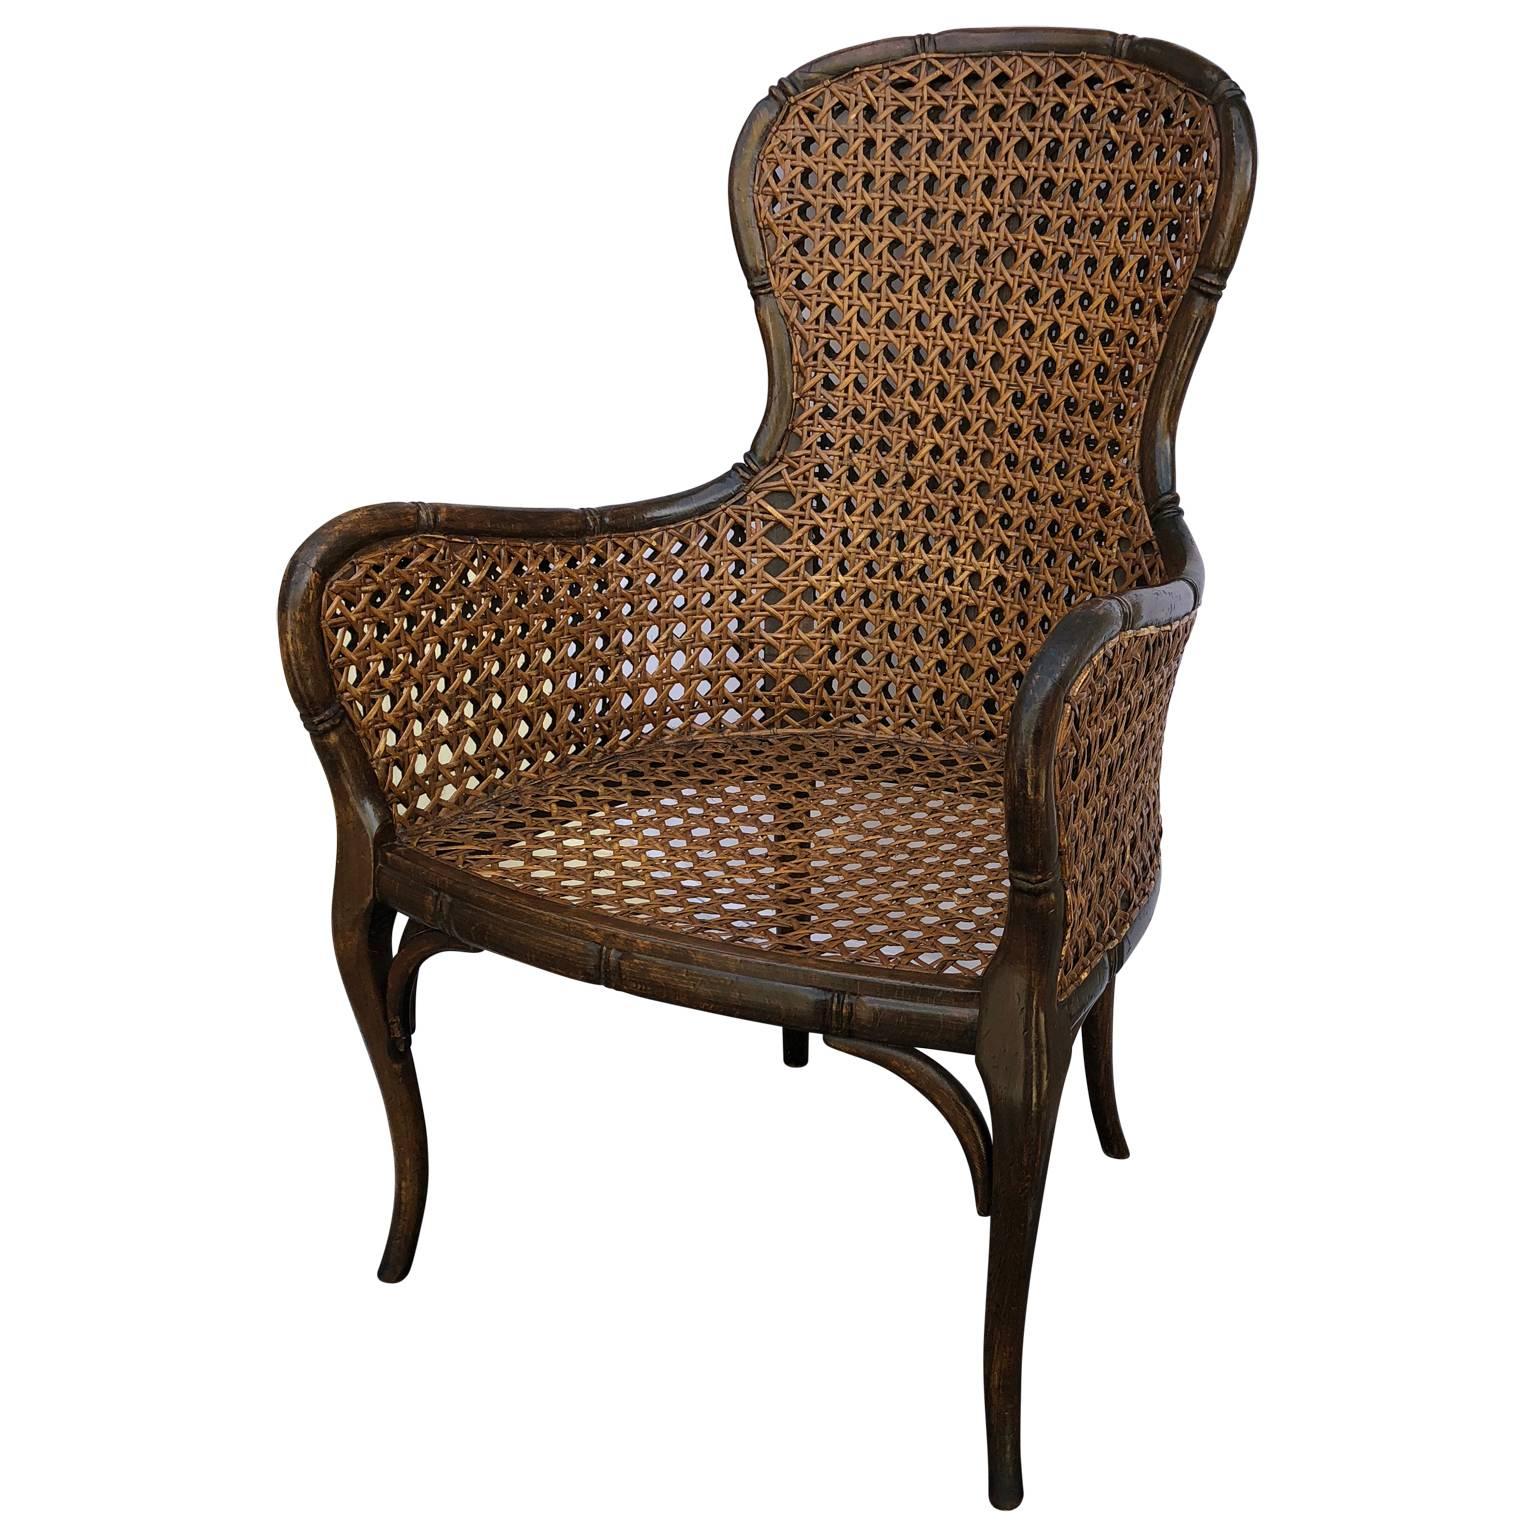 Faux bamboo cabriole leg cane highback armchair, Italy, 1960s.
Chair includes a black vinyl pillow
Measures: Seat height 16 inches
Table height 26 inches
Seat height with pillow 18.5.

 